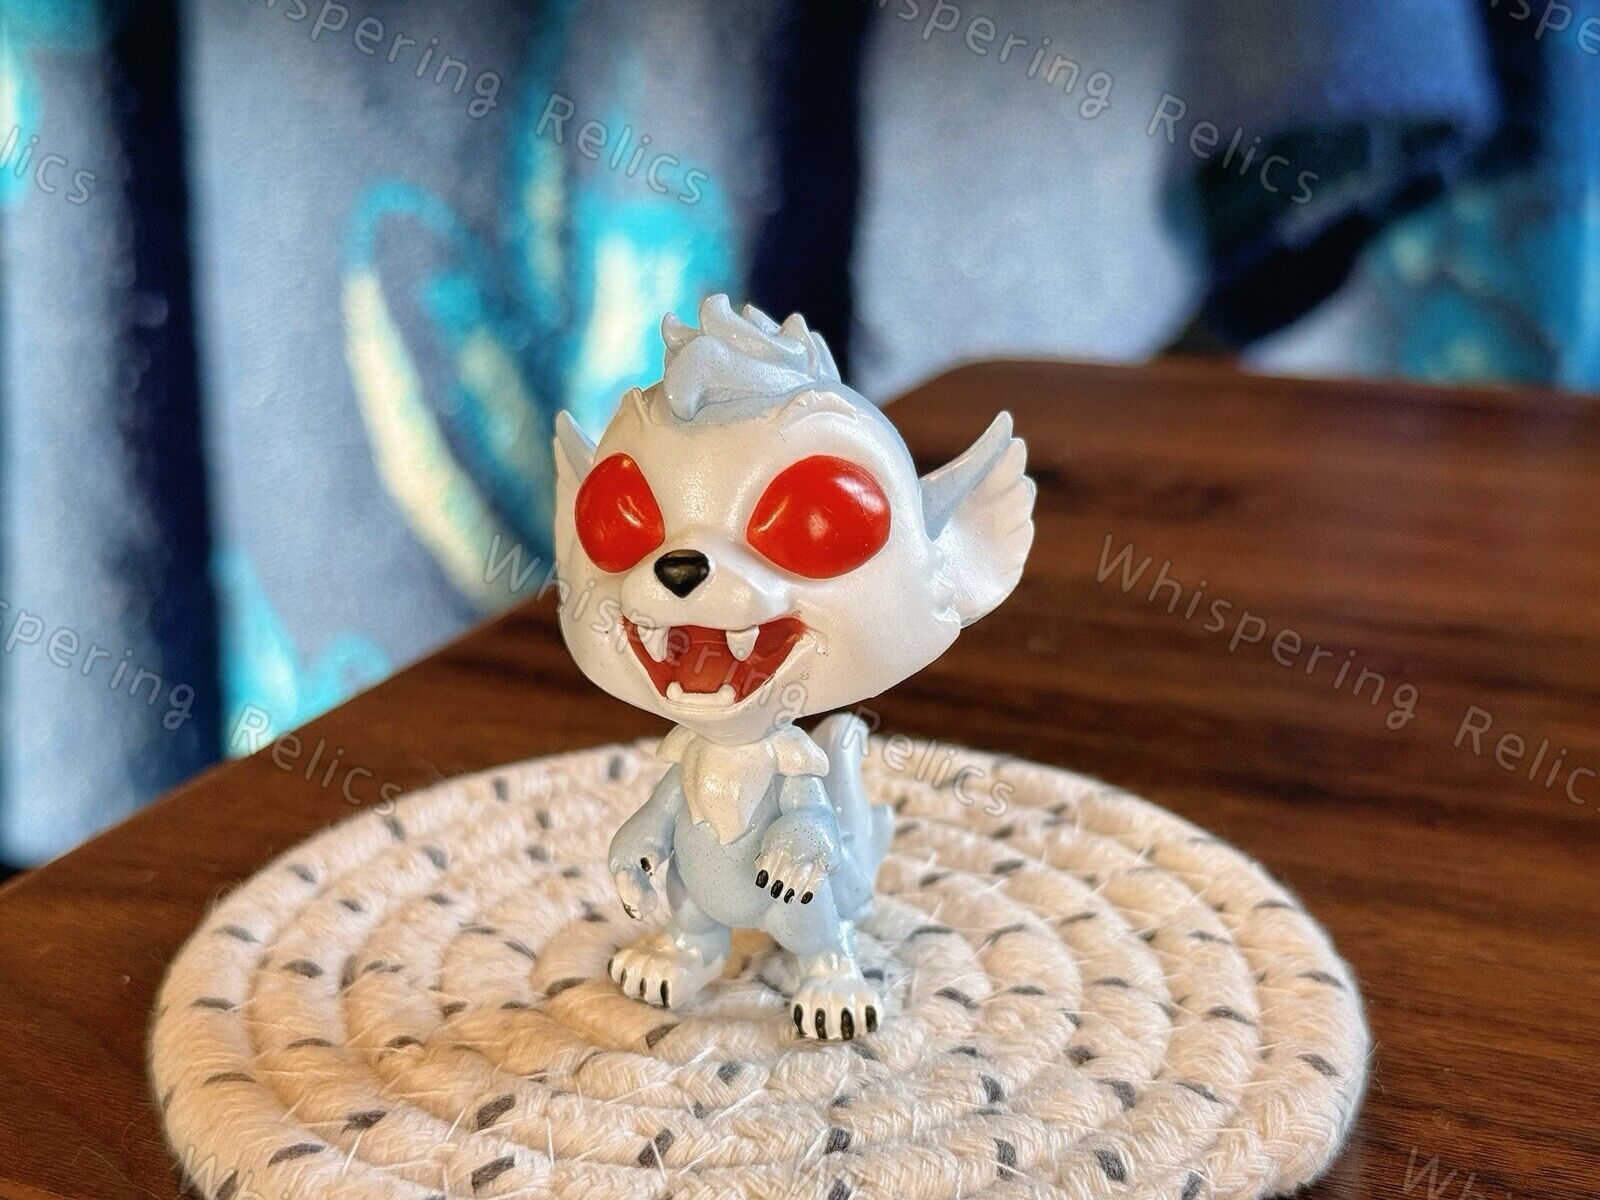 Adlet the Werewolf Variant Chase | Cryptkins series 2 | Cryptid Vinyl Figure